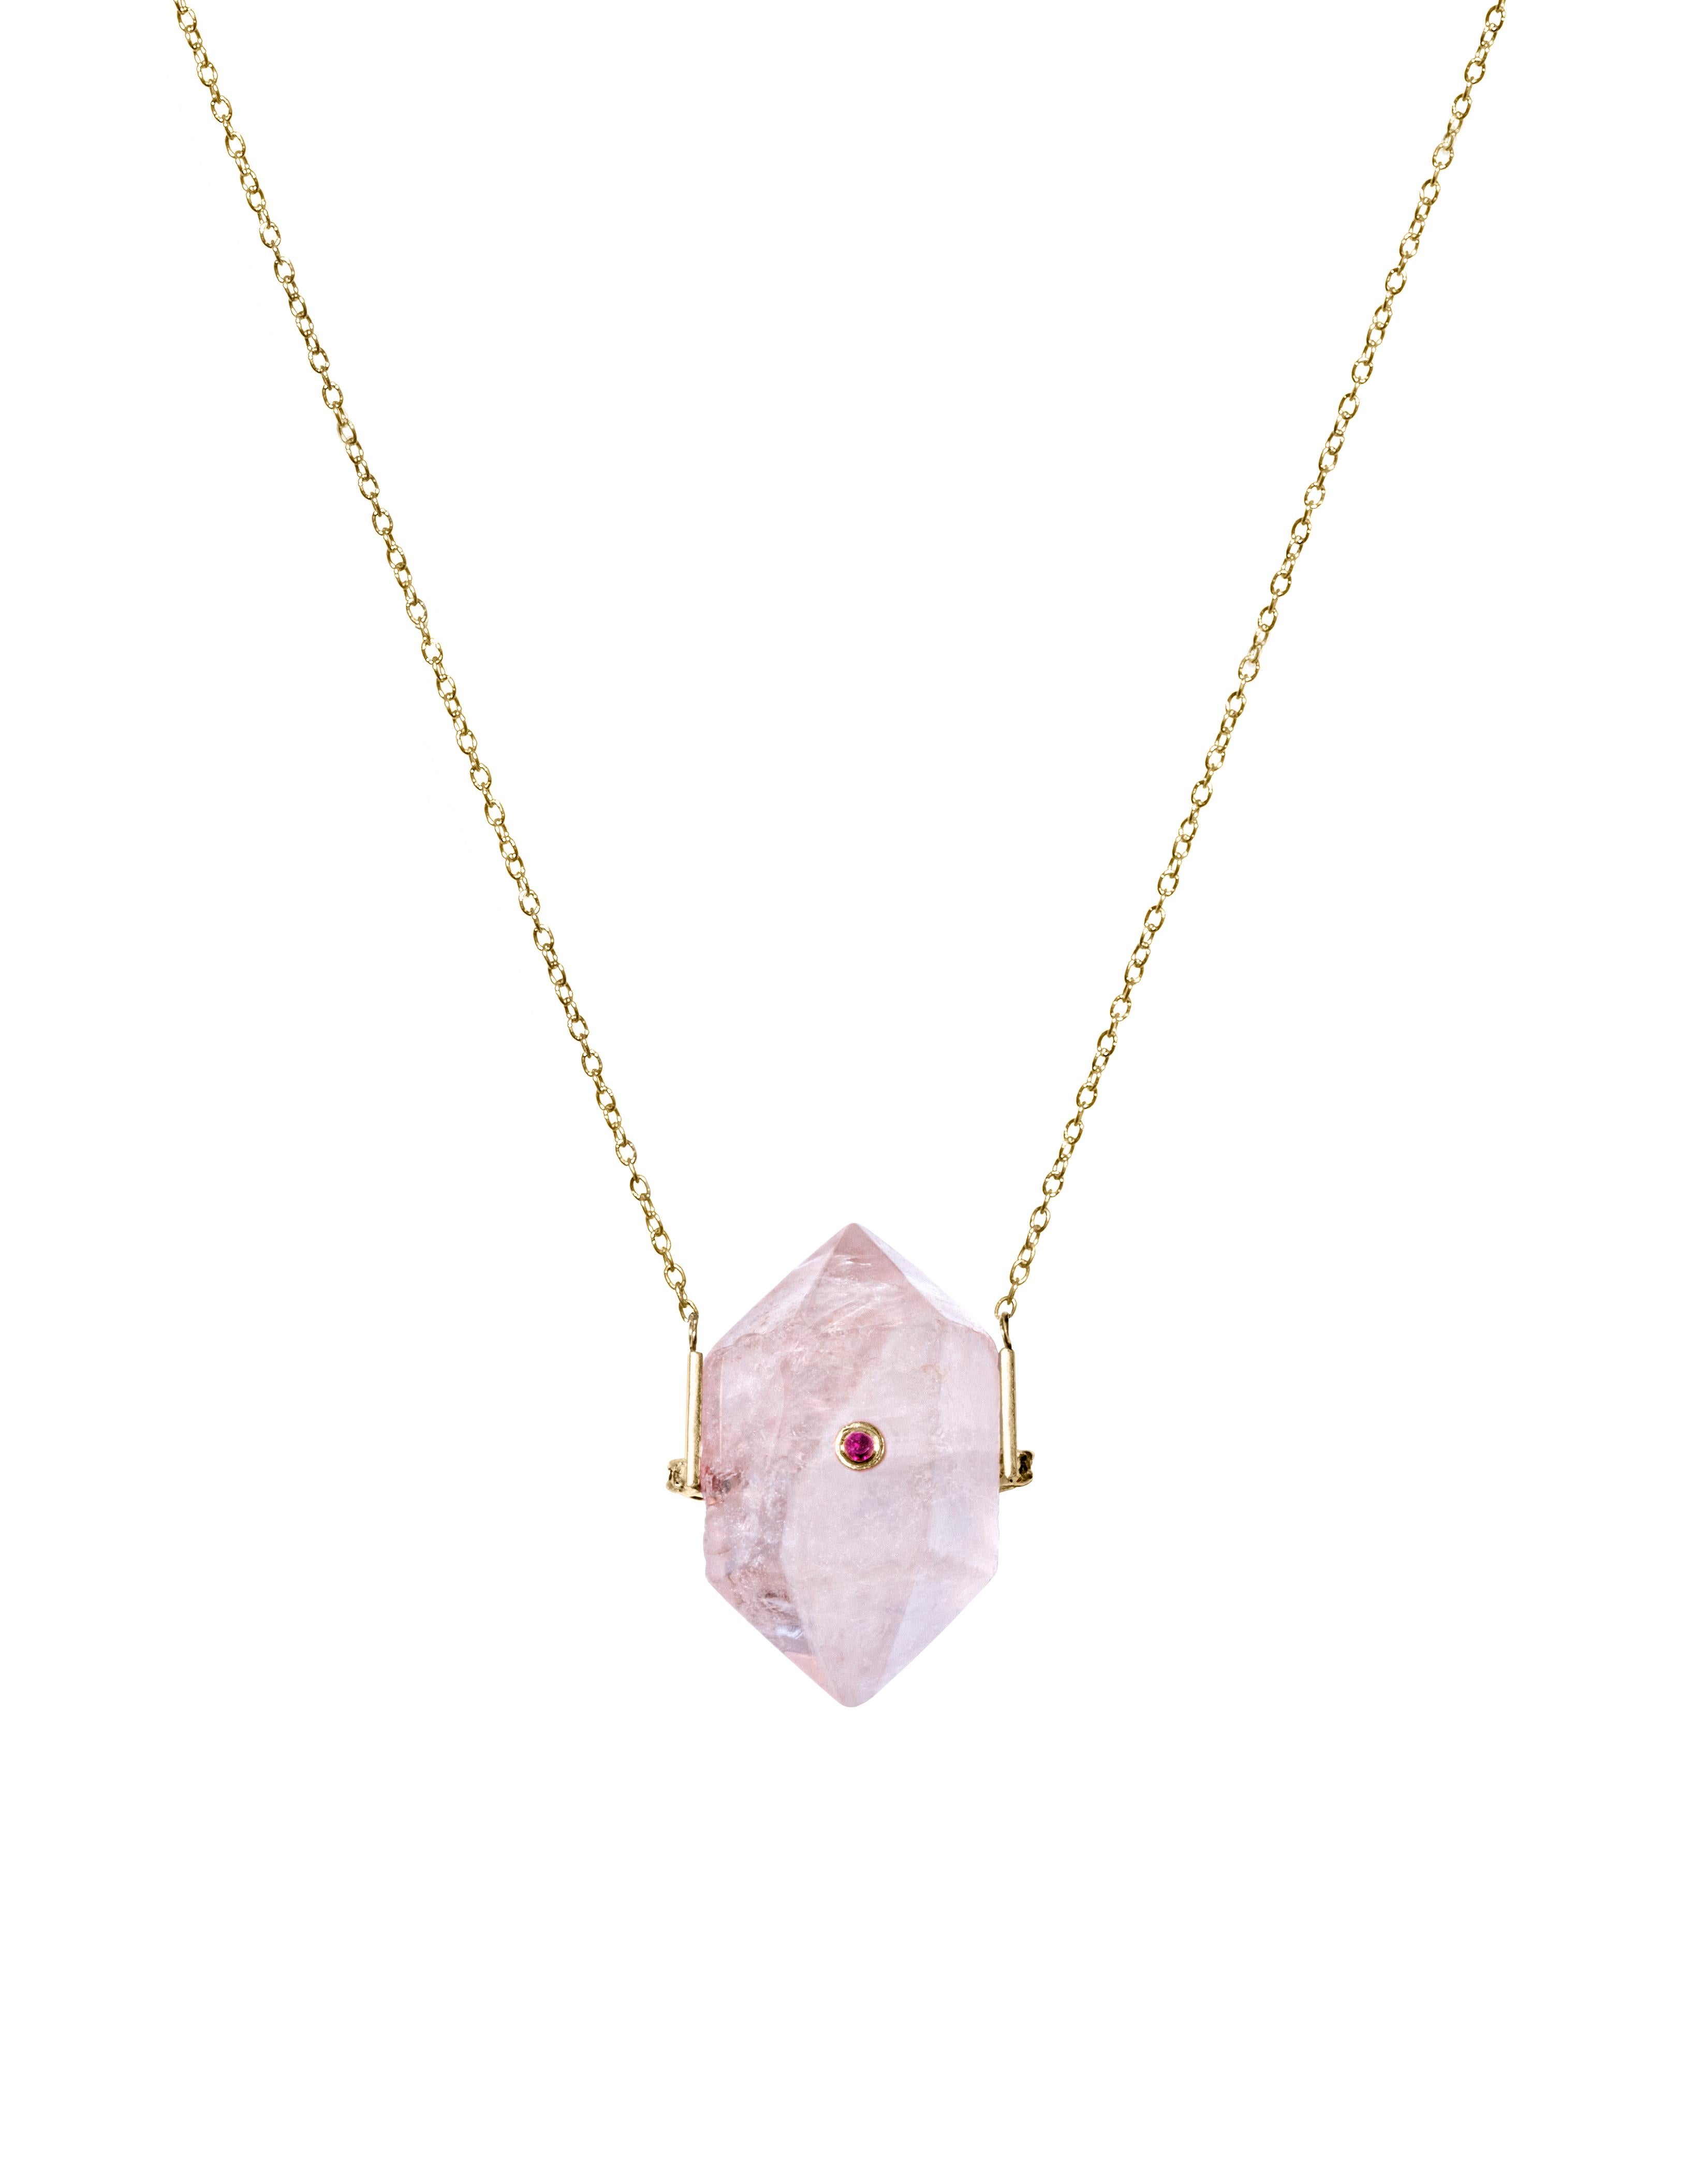 This delicate talisman pendant 14KY Gold necklace with Rose Quartz is available with Pink Tourmalines, Amethysts and White Sapphires. 

Rose Crystal Quartz double terminated pointed, about 30-54mm in length and 11-14mm in width.

Pink Tourmalines,